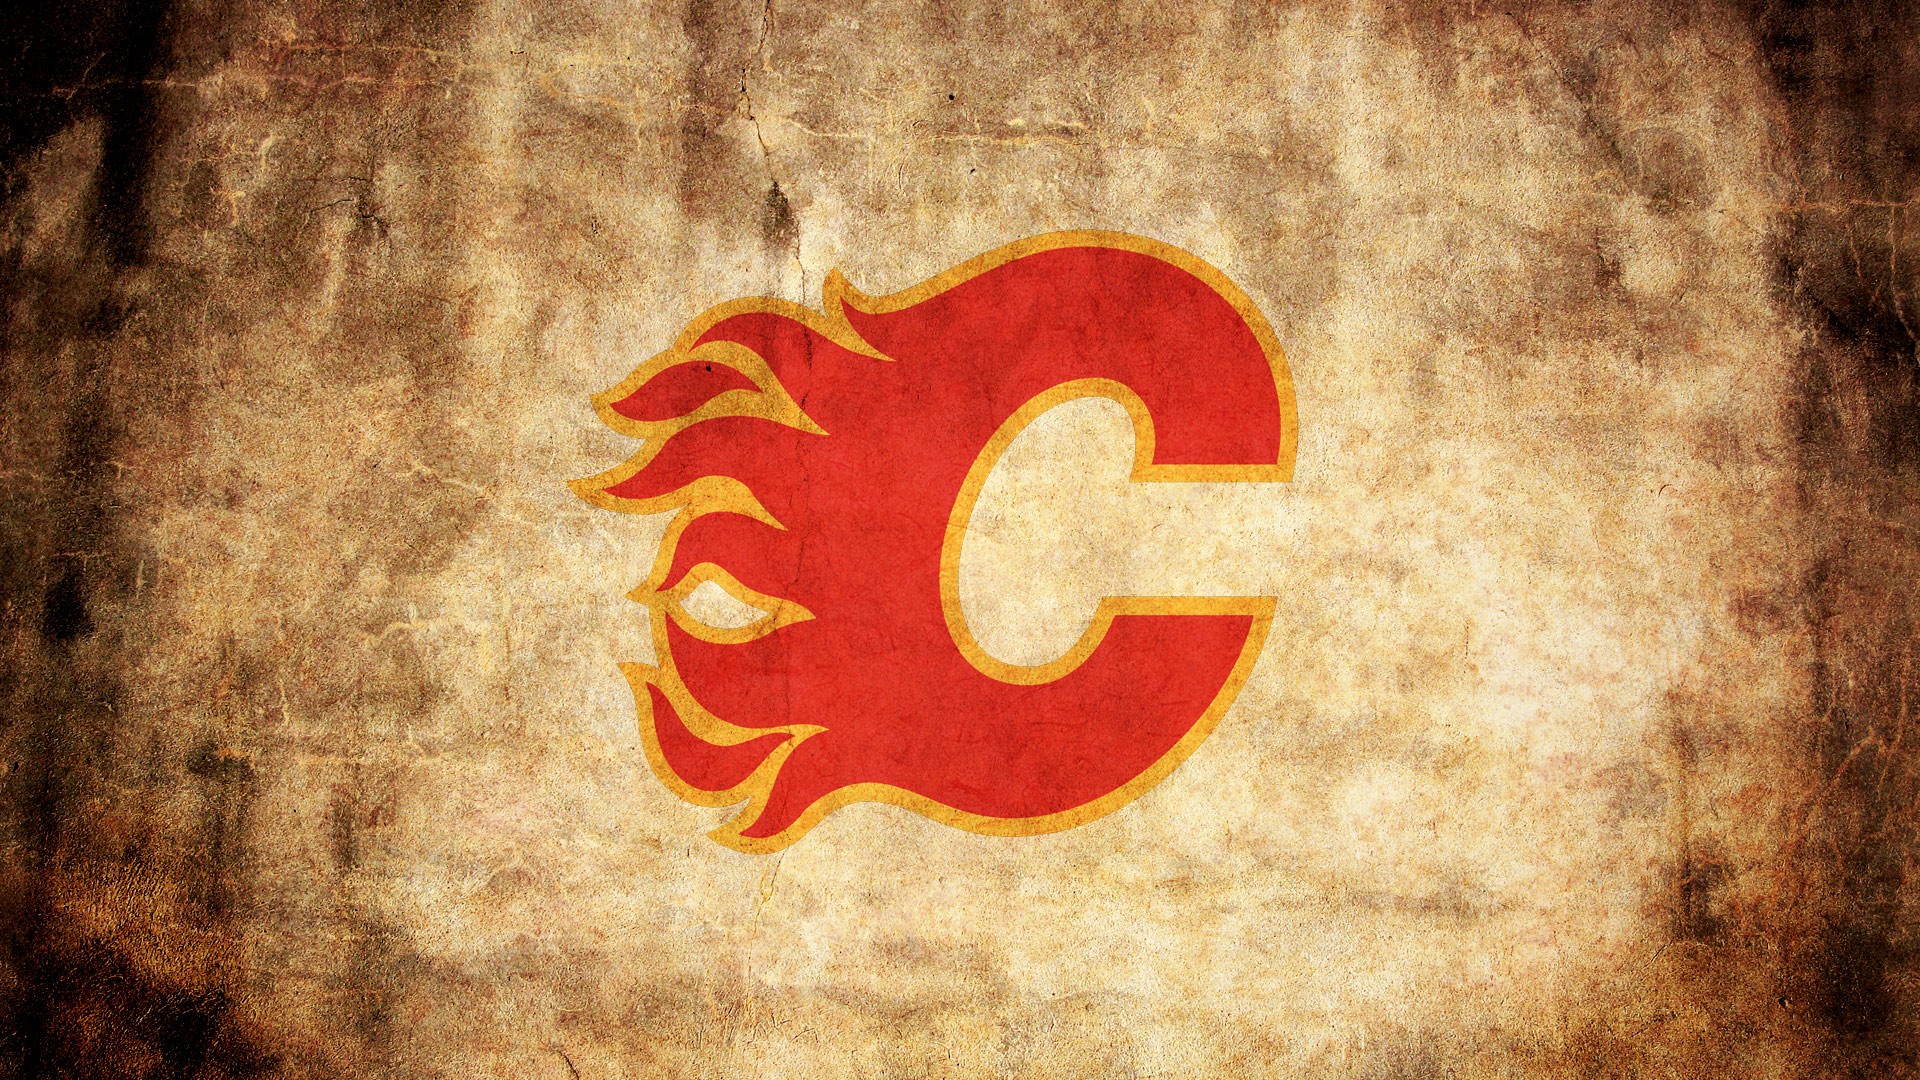 Calgary Flames HD download for free